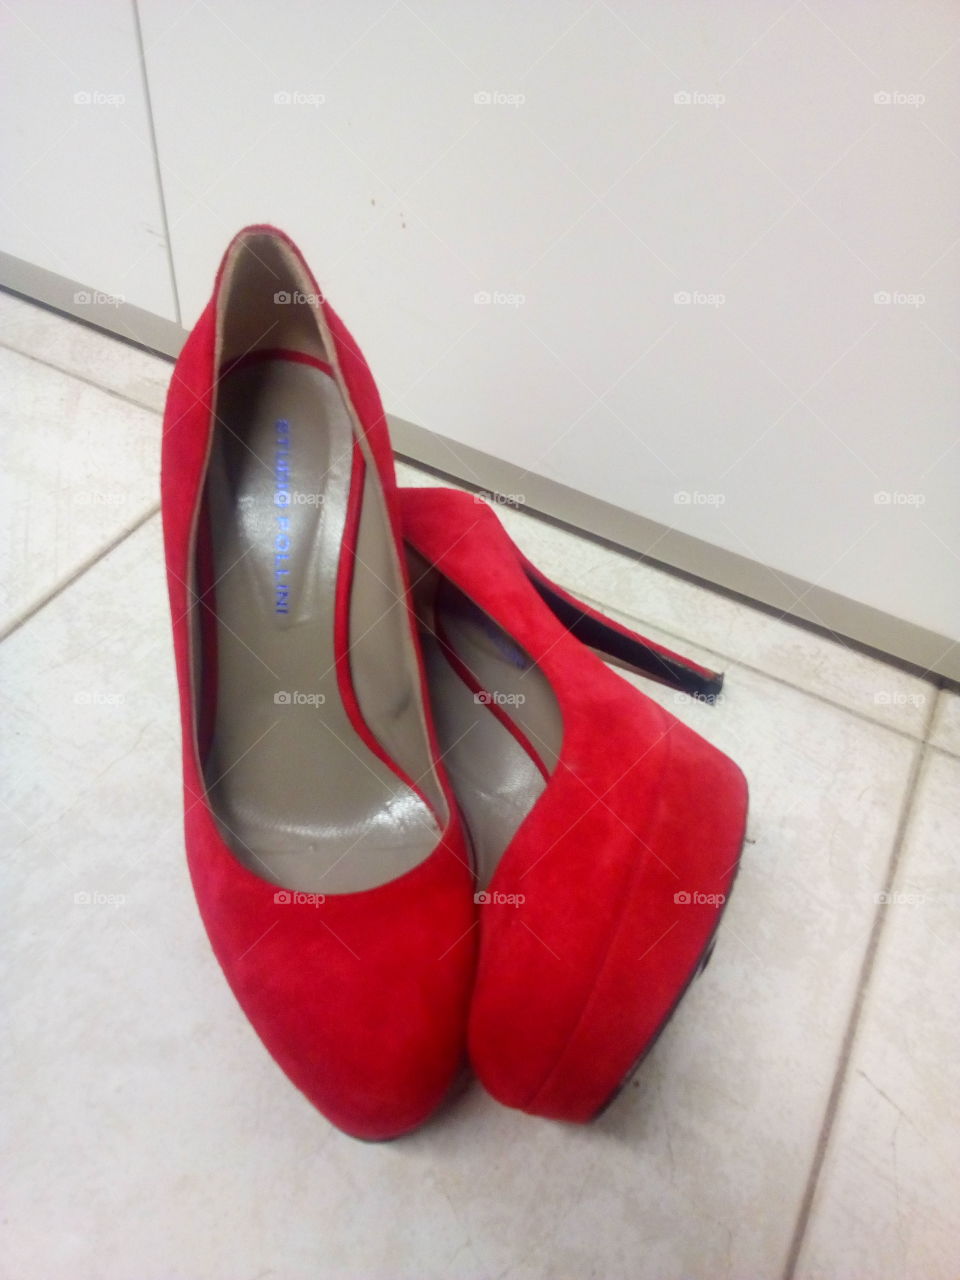 Every woman needs a pair of red shoes. if you are blue, you can wearing them for makes you happy. red shoes gives power